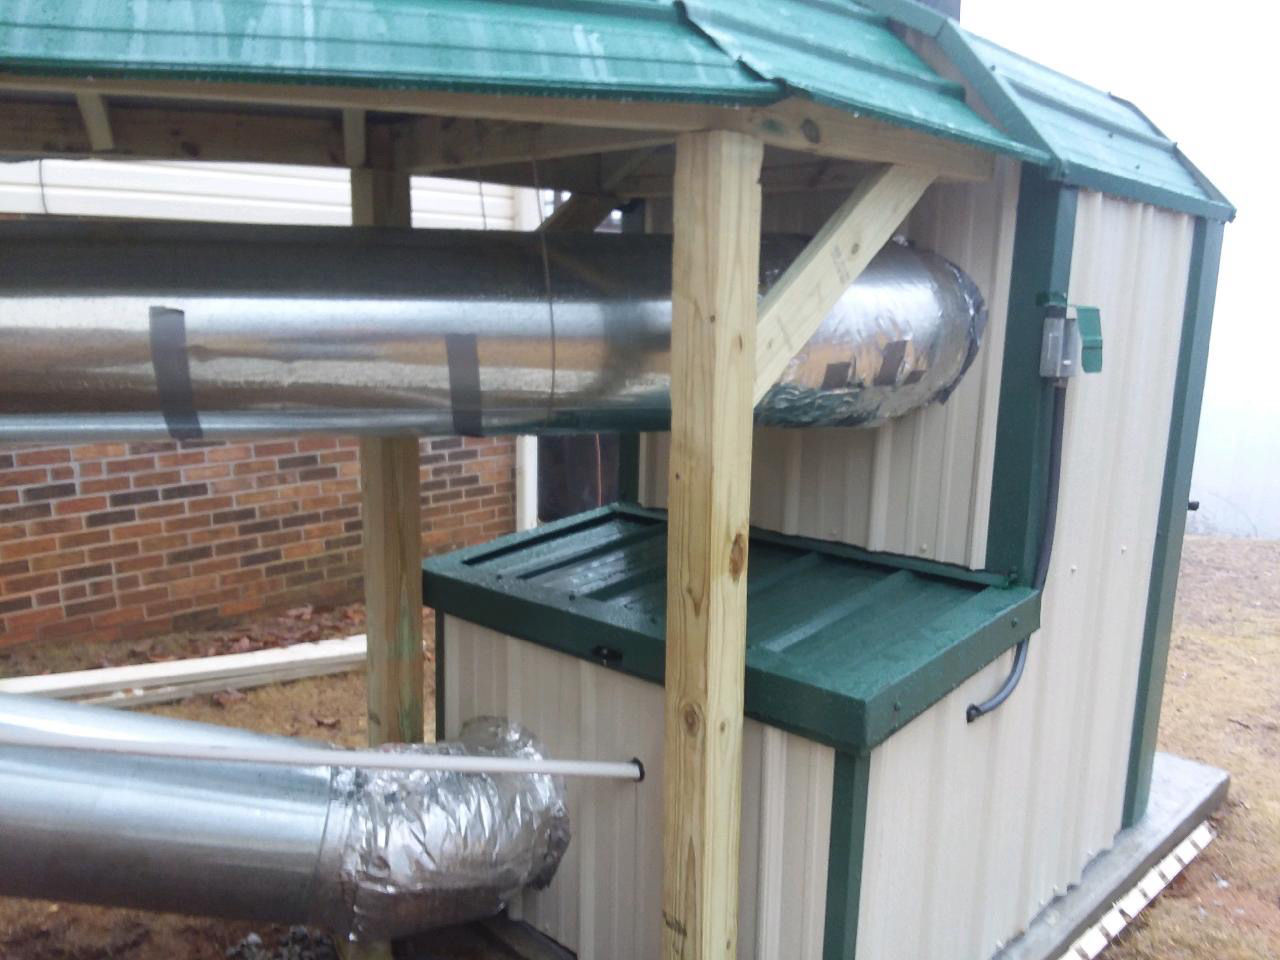 12" insulated ductwork connected to hot air wood furnace